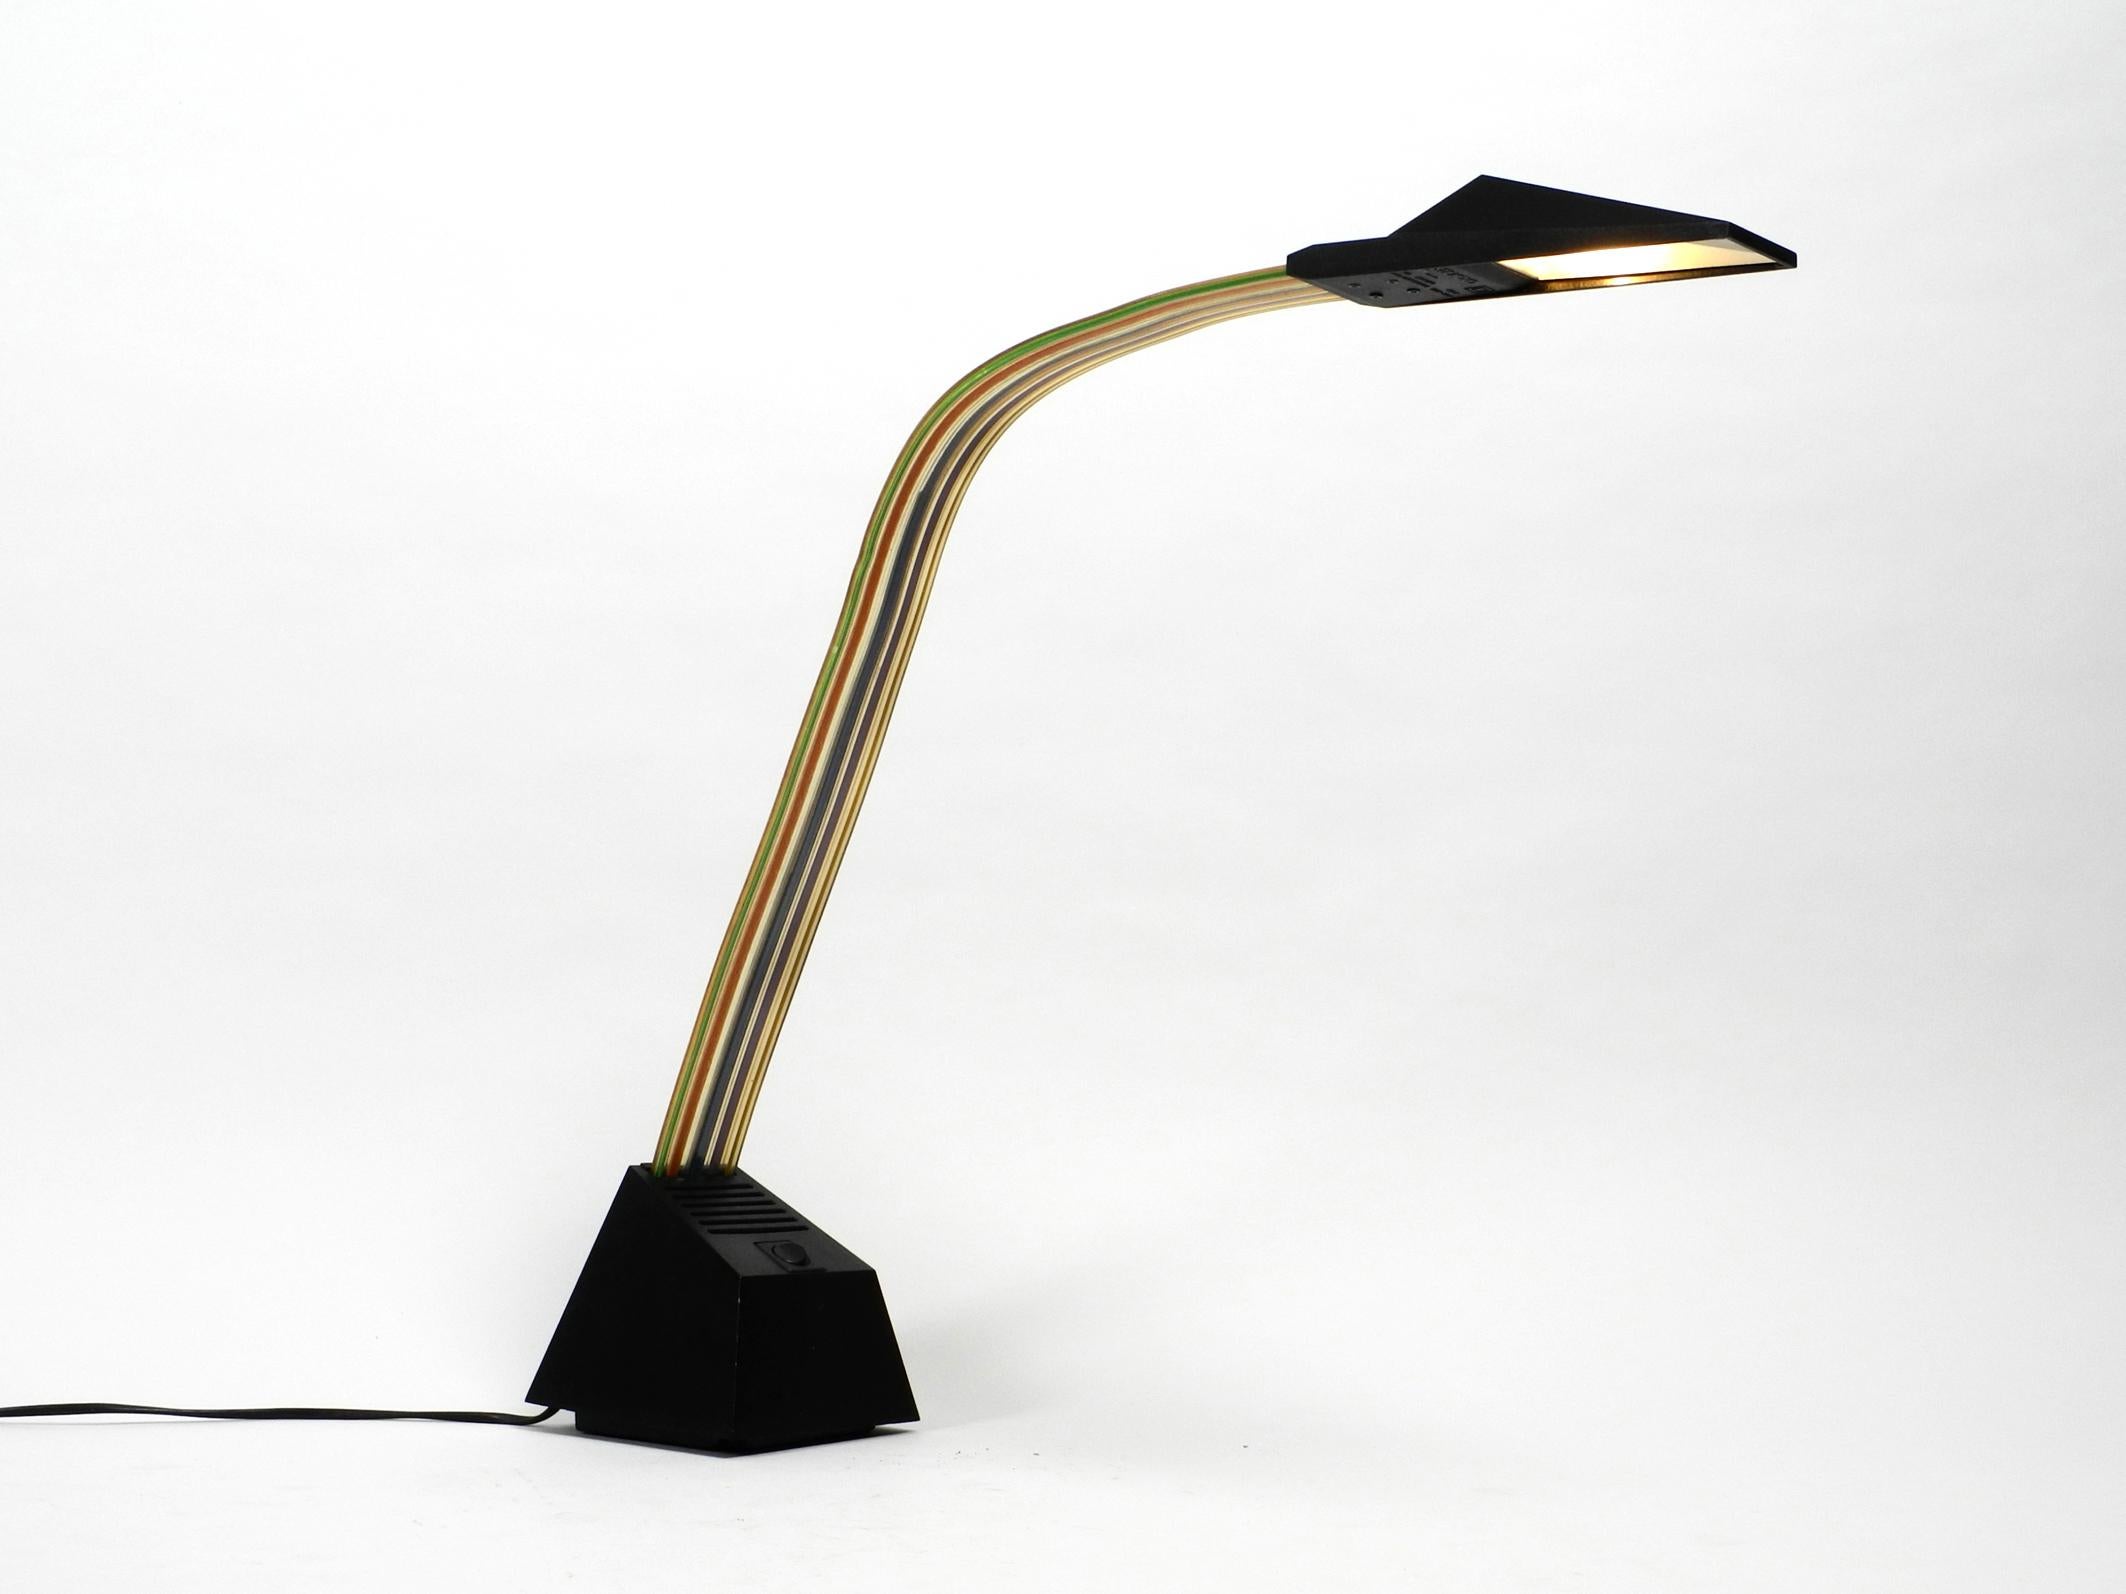 Large 1980s halogen table lamp by Alberto Fraser for Stilnovo. 
The design Classic from the 1980s in postmodern design. Made in Italy. 
Great Minimalist design. Housing is made of metal and plastic. 
The neck is made of transparent, flexible